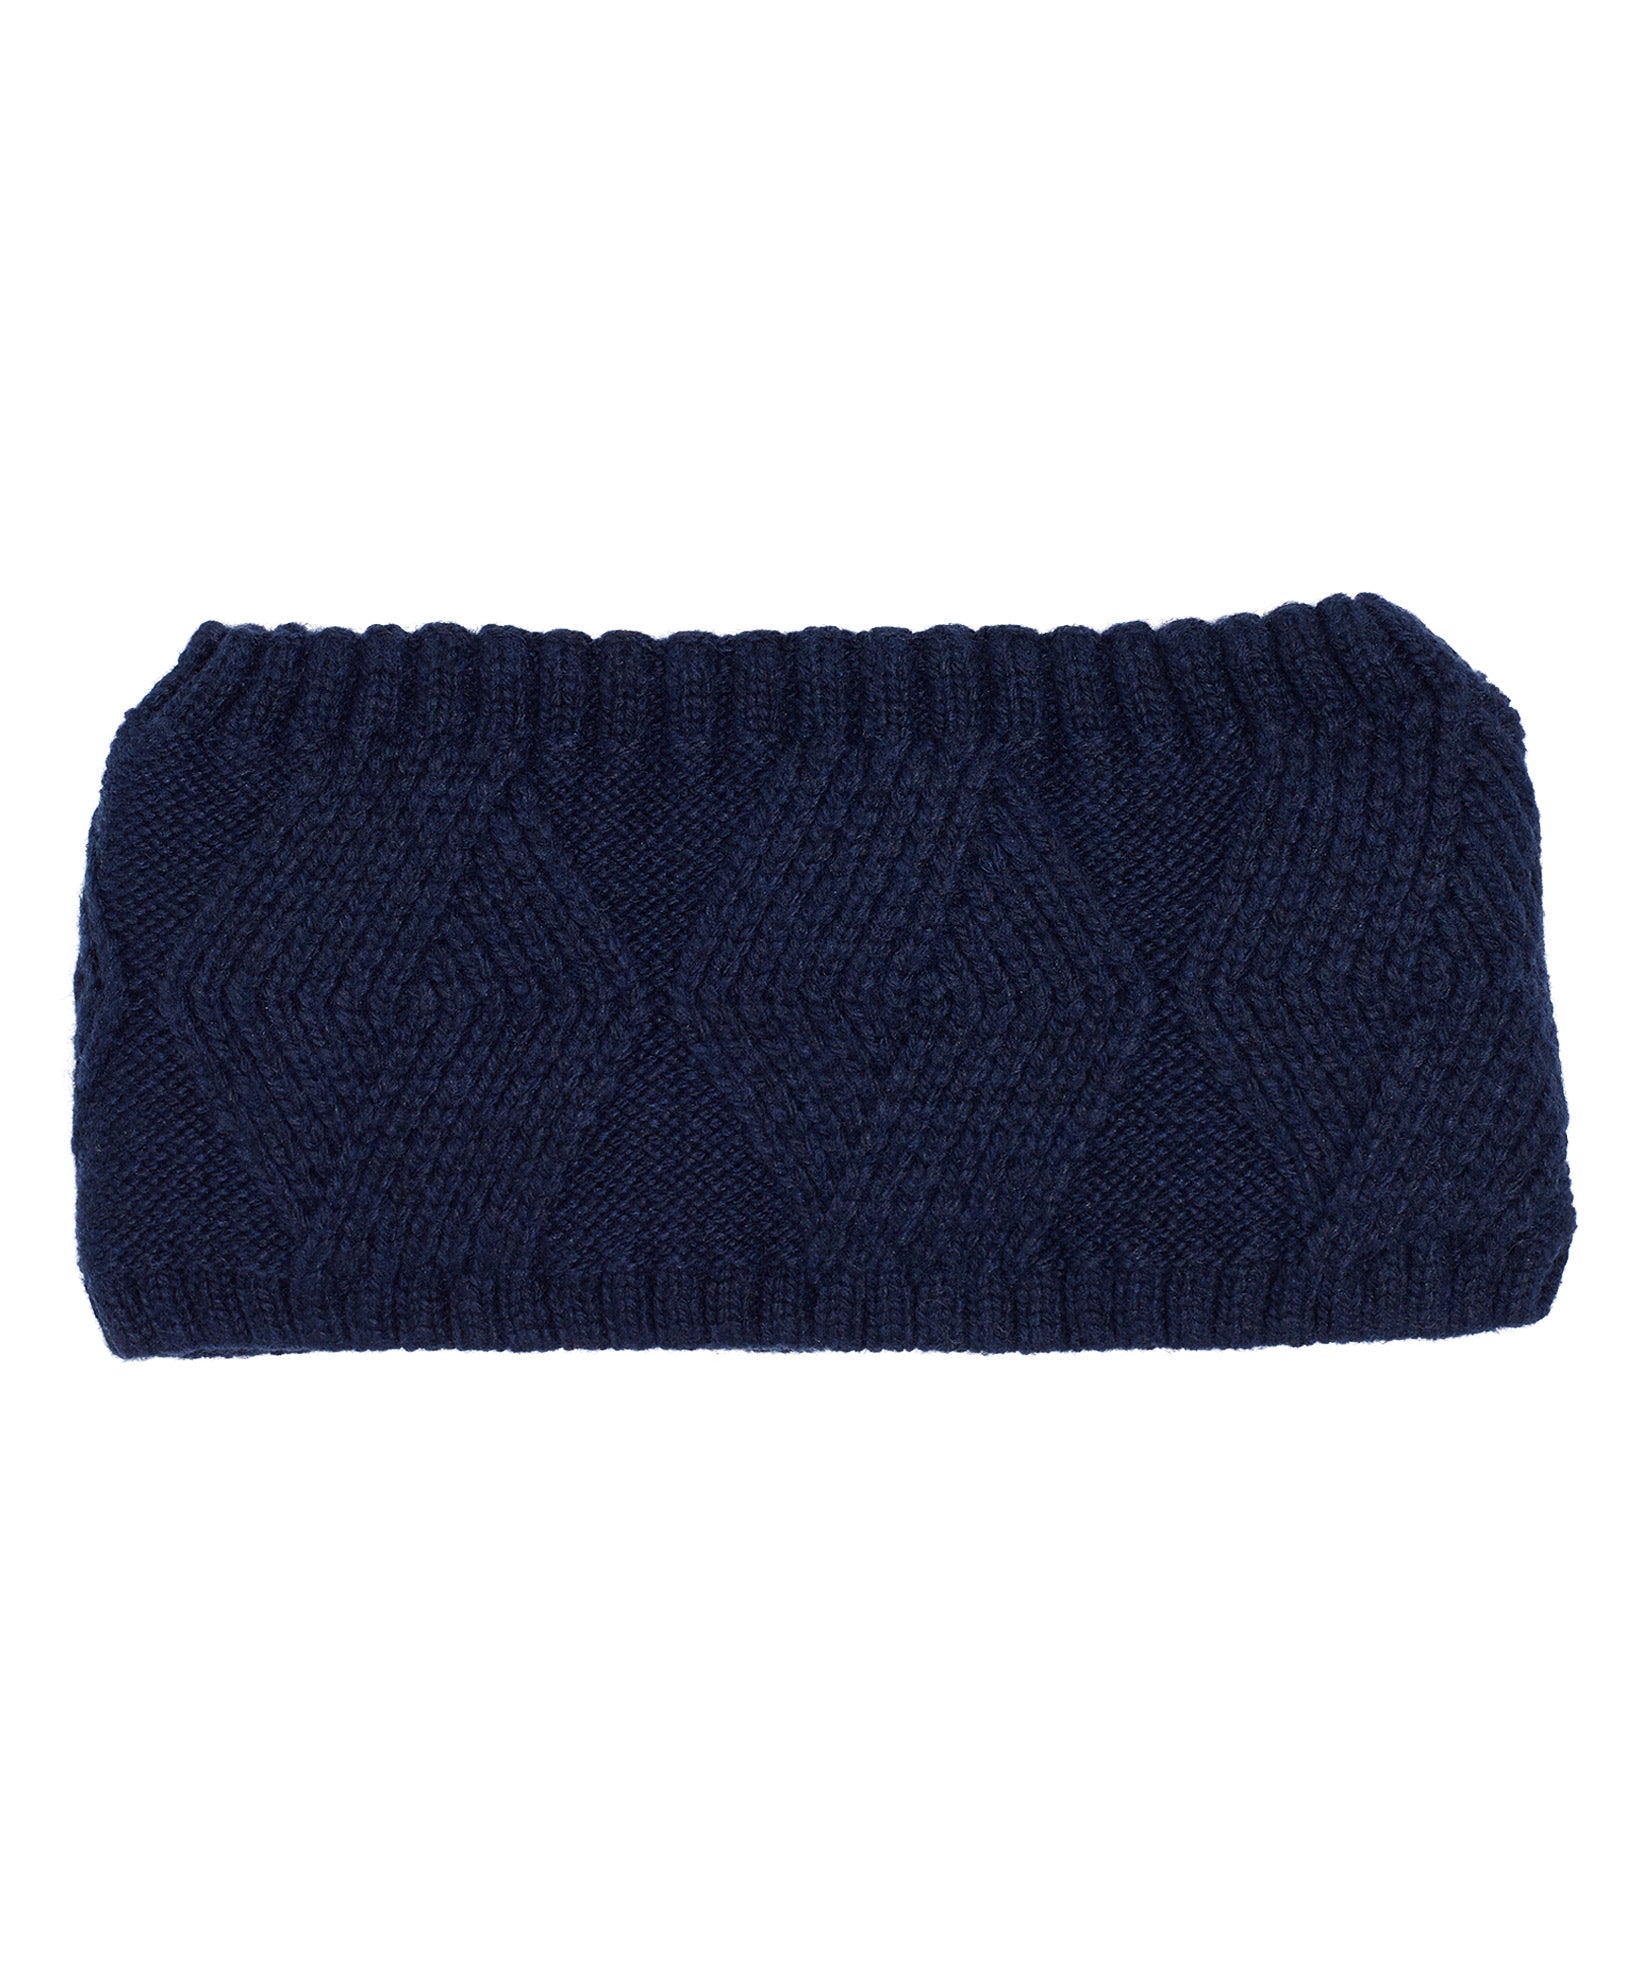 Recycled Cable Headband in color Navy